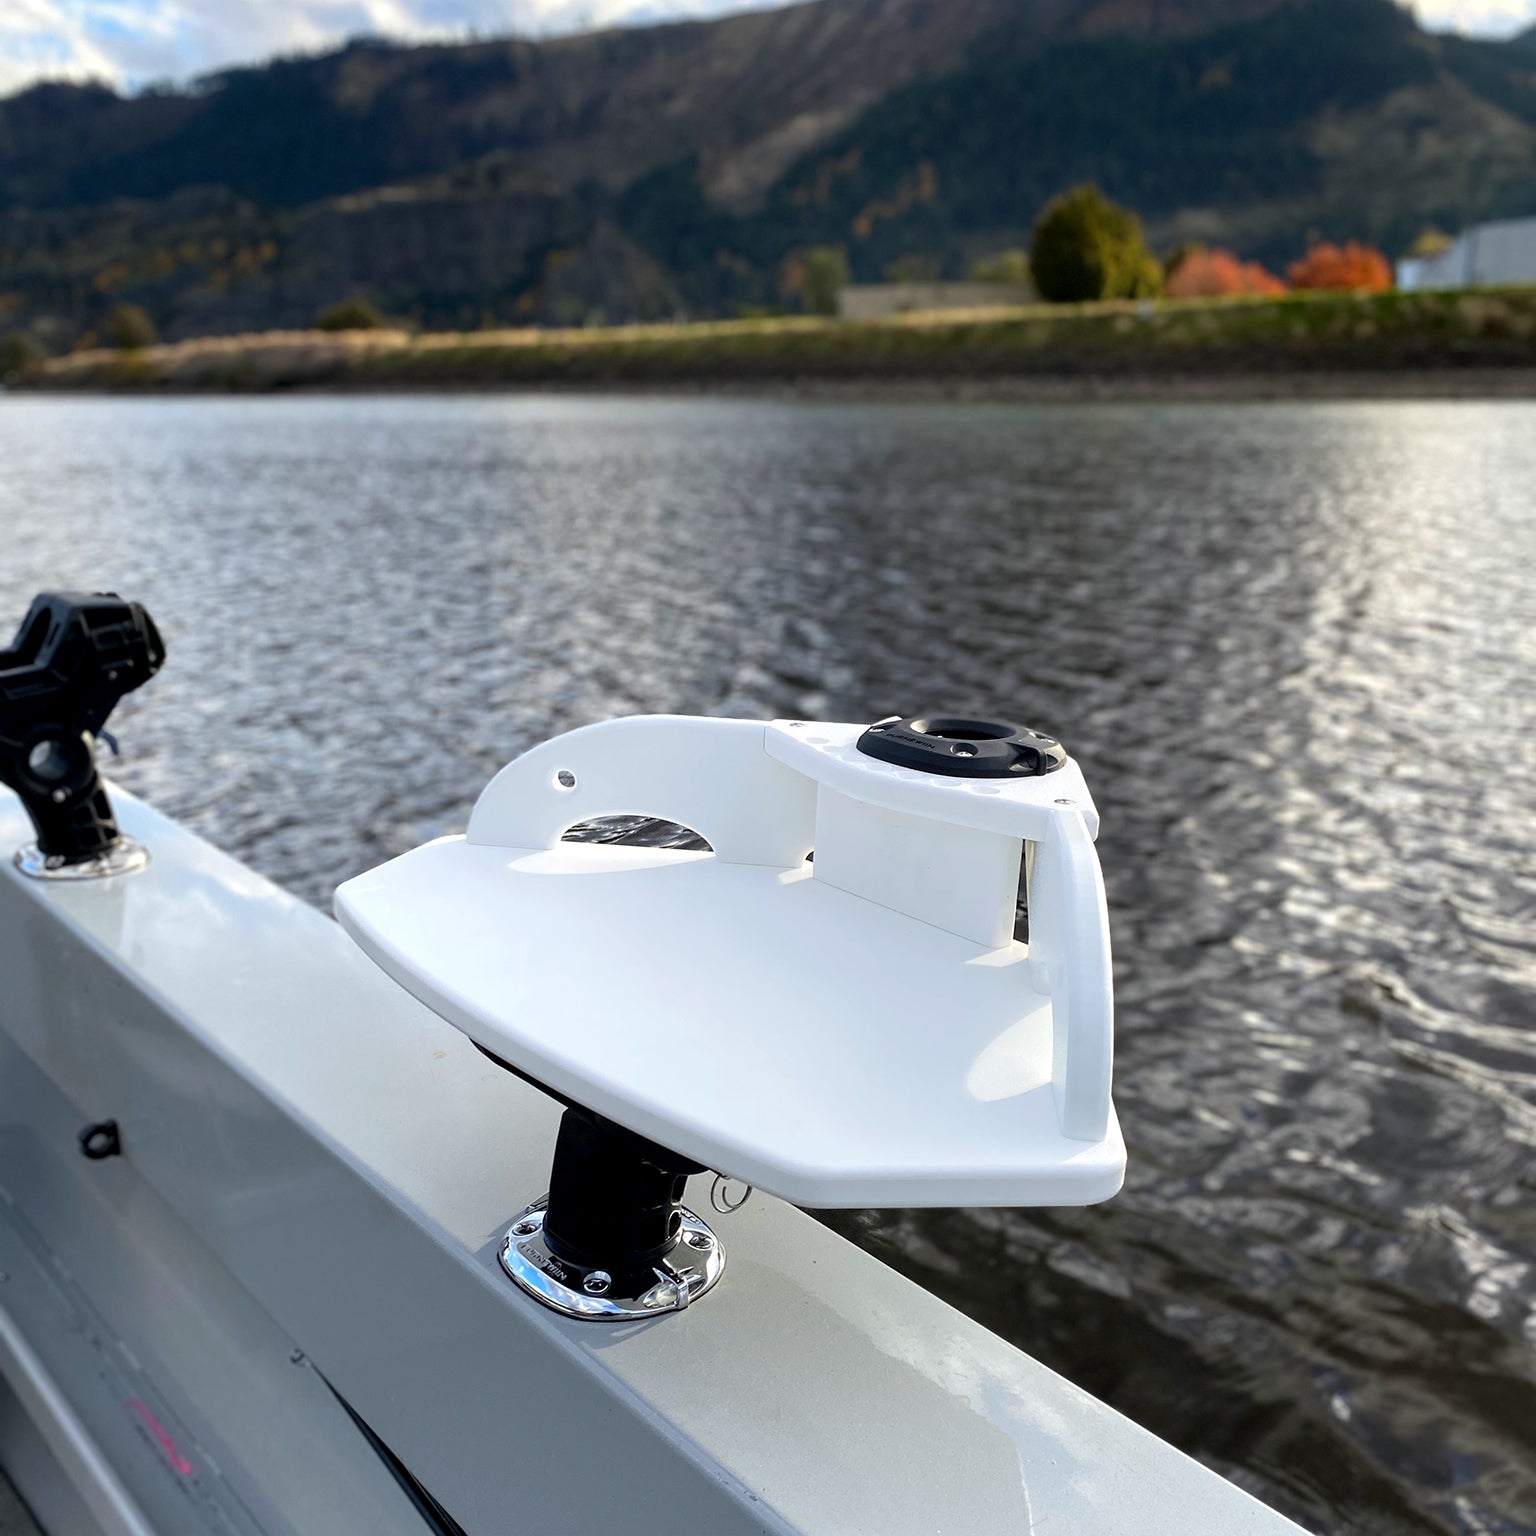 in CB3220 Cutting Board is mounted with a GM650 on the starboard gunwale with a foothill in the background.